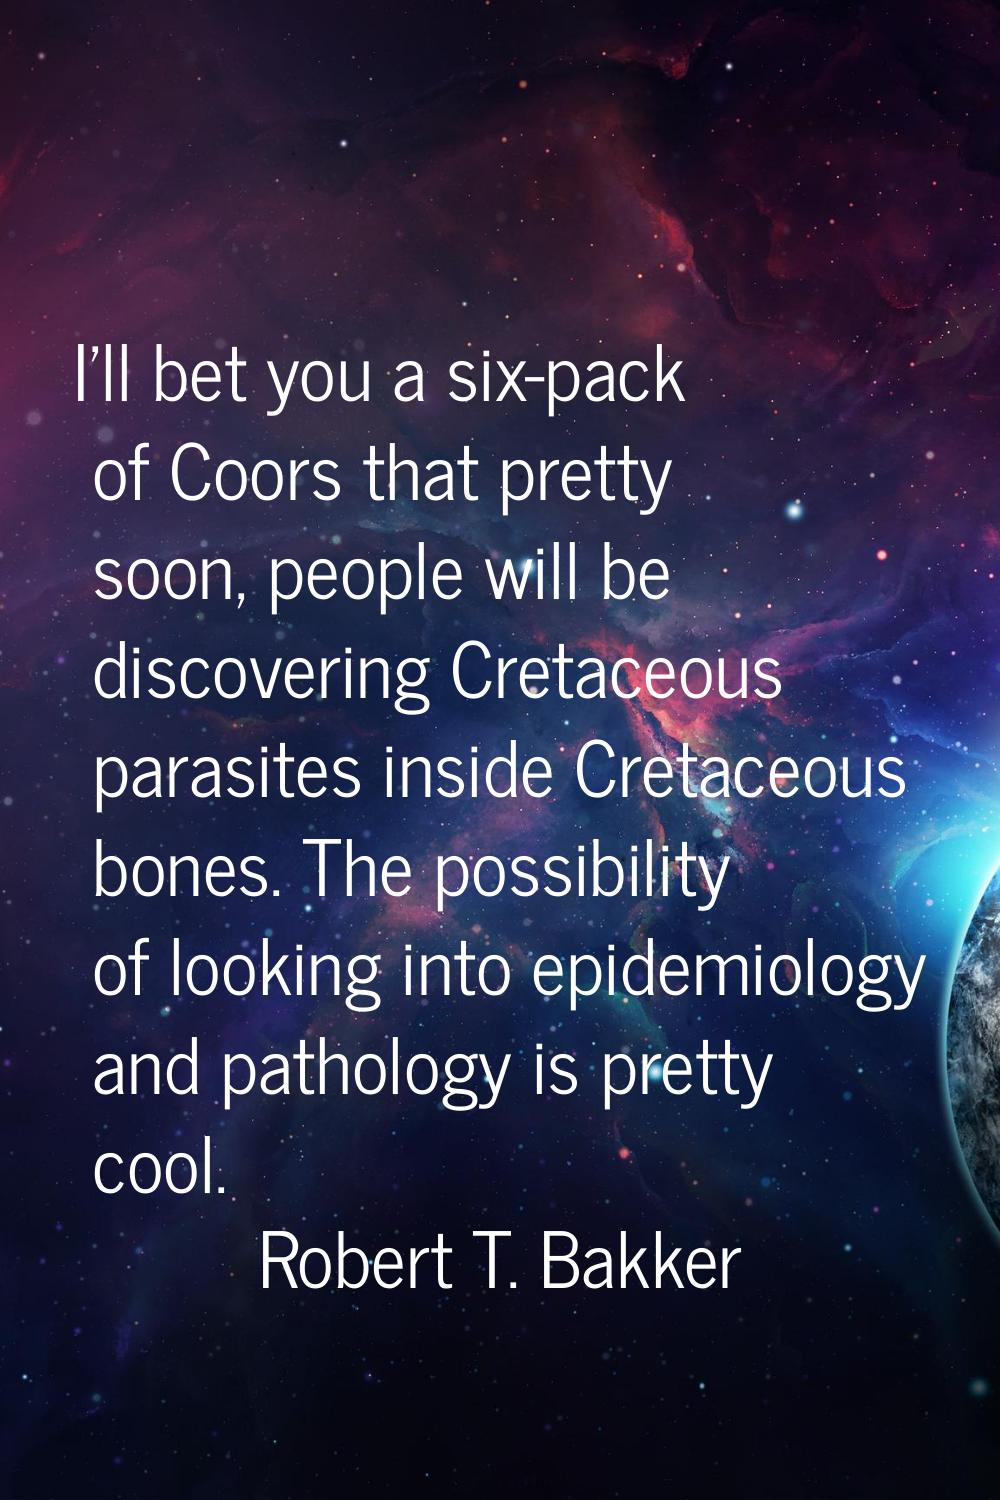 I'll bet you a six-pack of Coors that pretty soon, people will be discovering Cretaceous parasites 